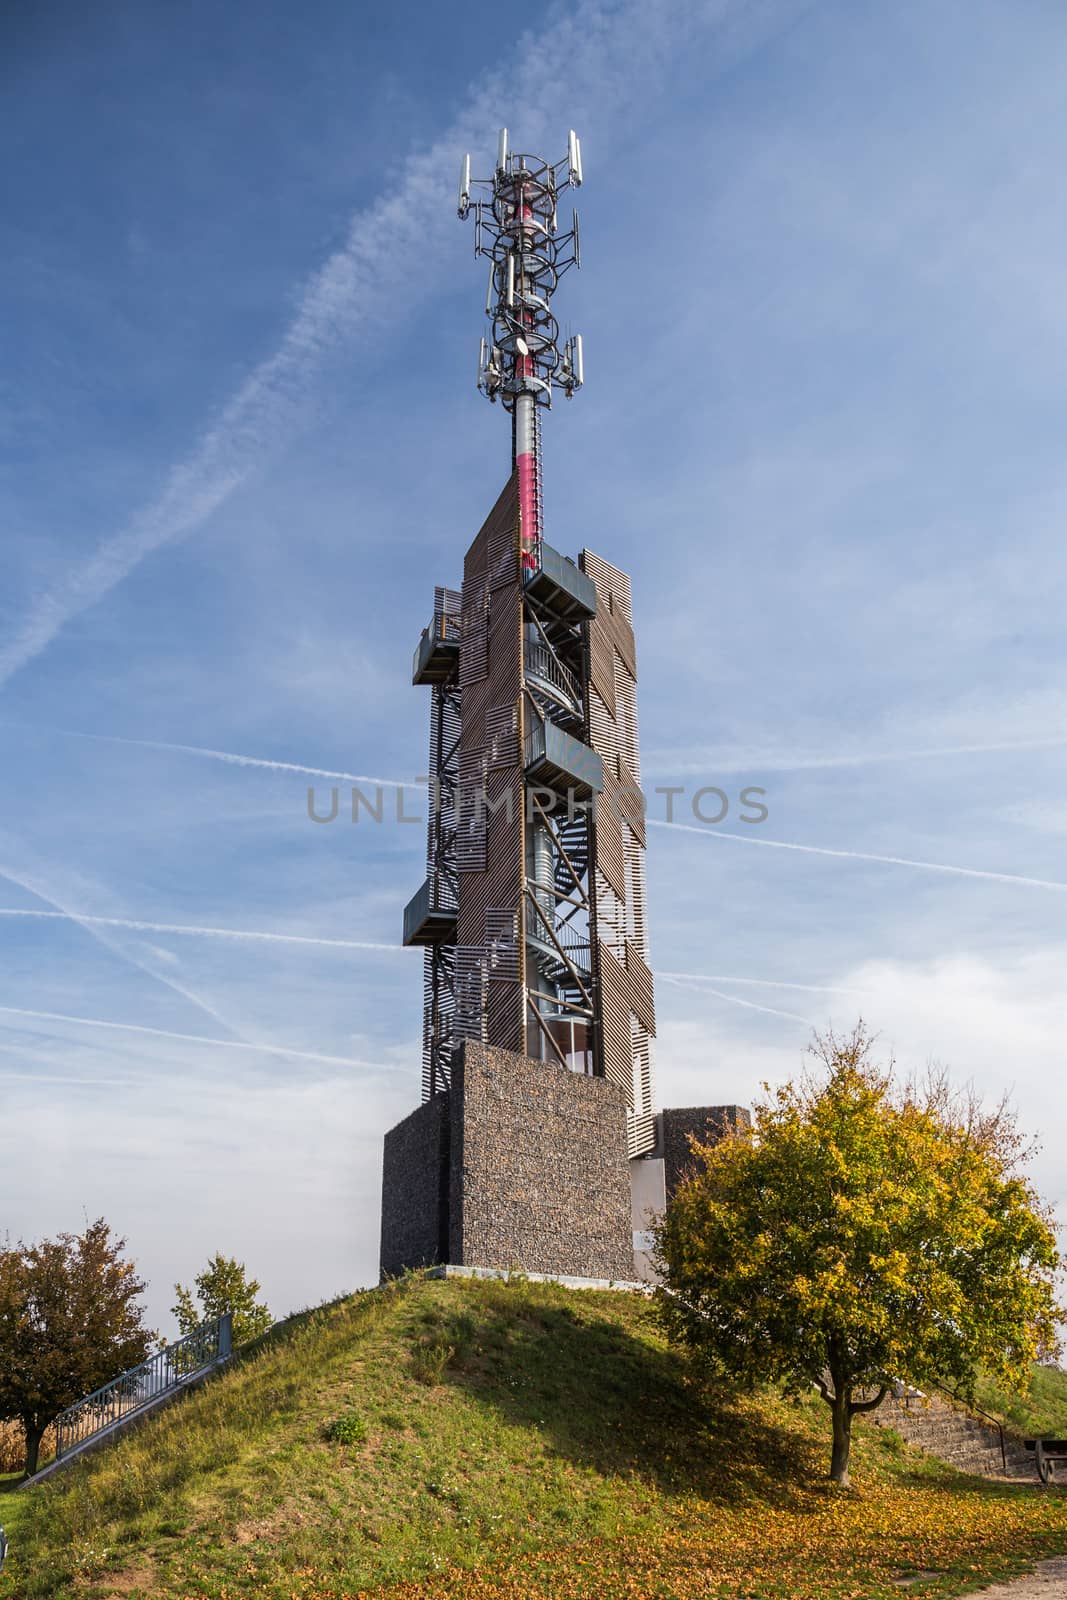 Romanka Lookout Tower is located near village Hruby Jesenik in the district Nymburk in the Central Region. Czech republic. Is is also antenna transmitter. Nice autumn colorful scene with blue sky. by petrsvoboda91